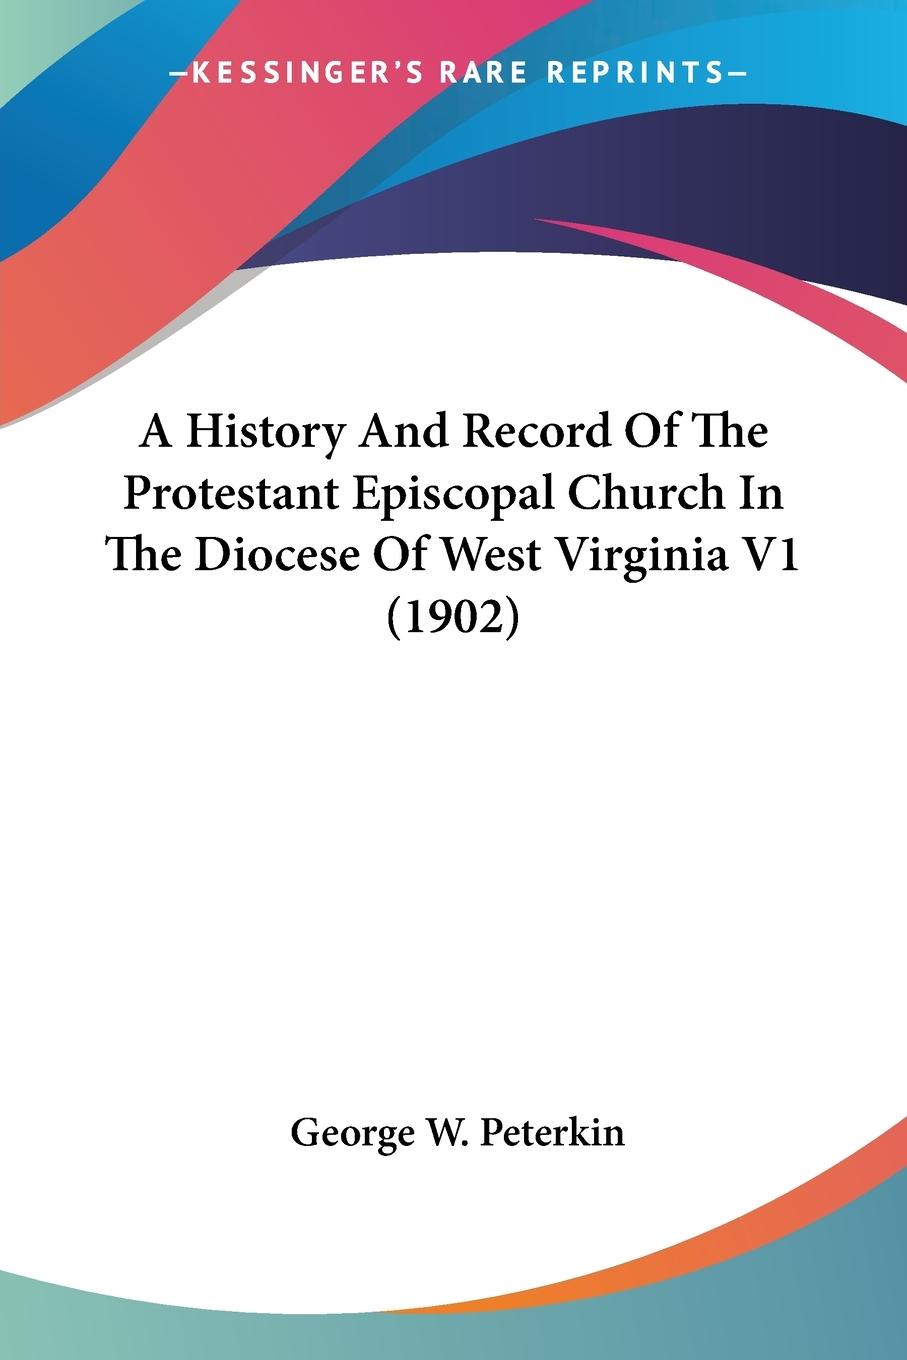 A History And Record Of The Protestant Episcopal Church In The Diocese Of West Virginia V1 (1902) - Peterkin, George W.